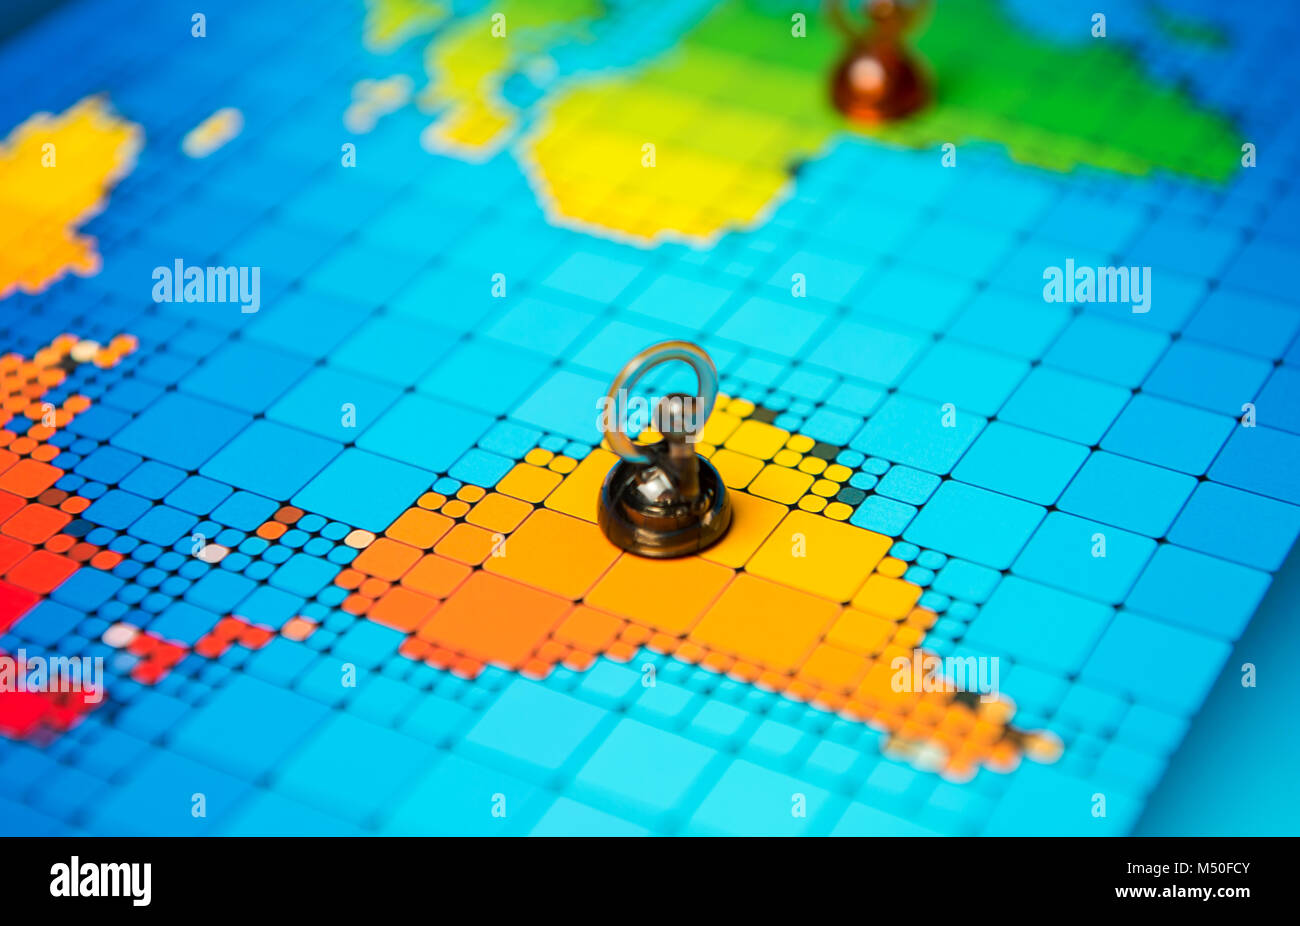 Pushpins on a map of South America Stock Photo